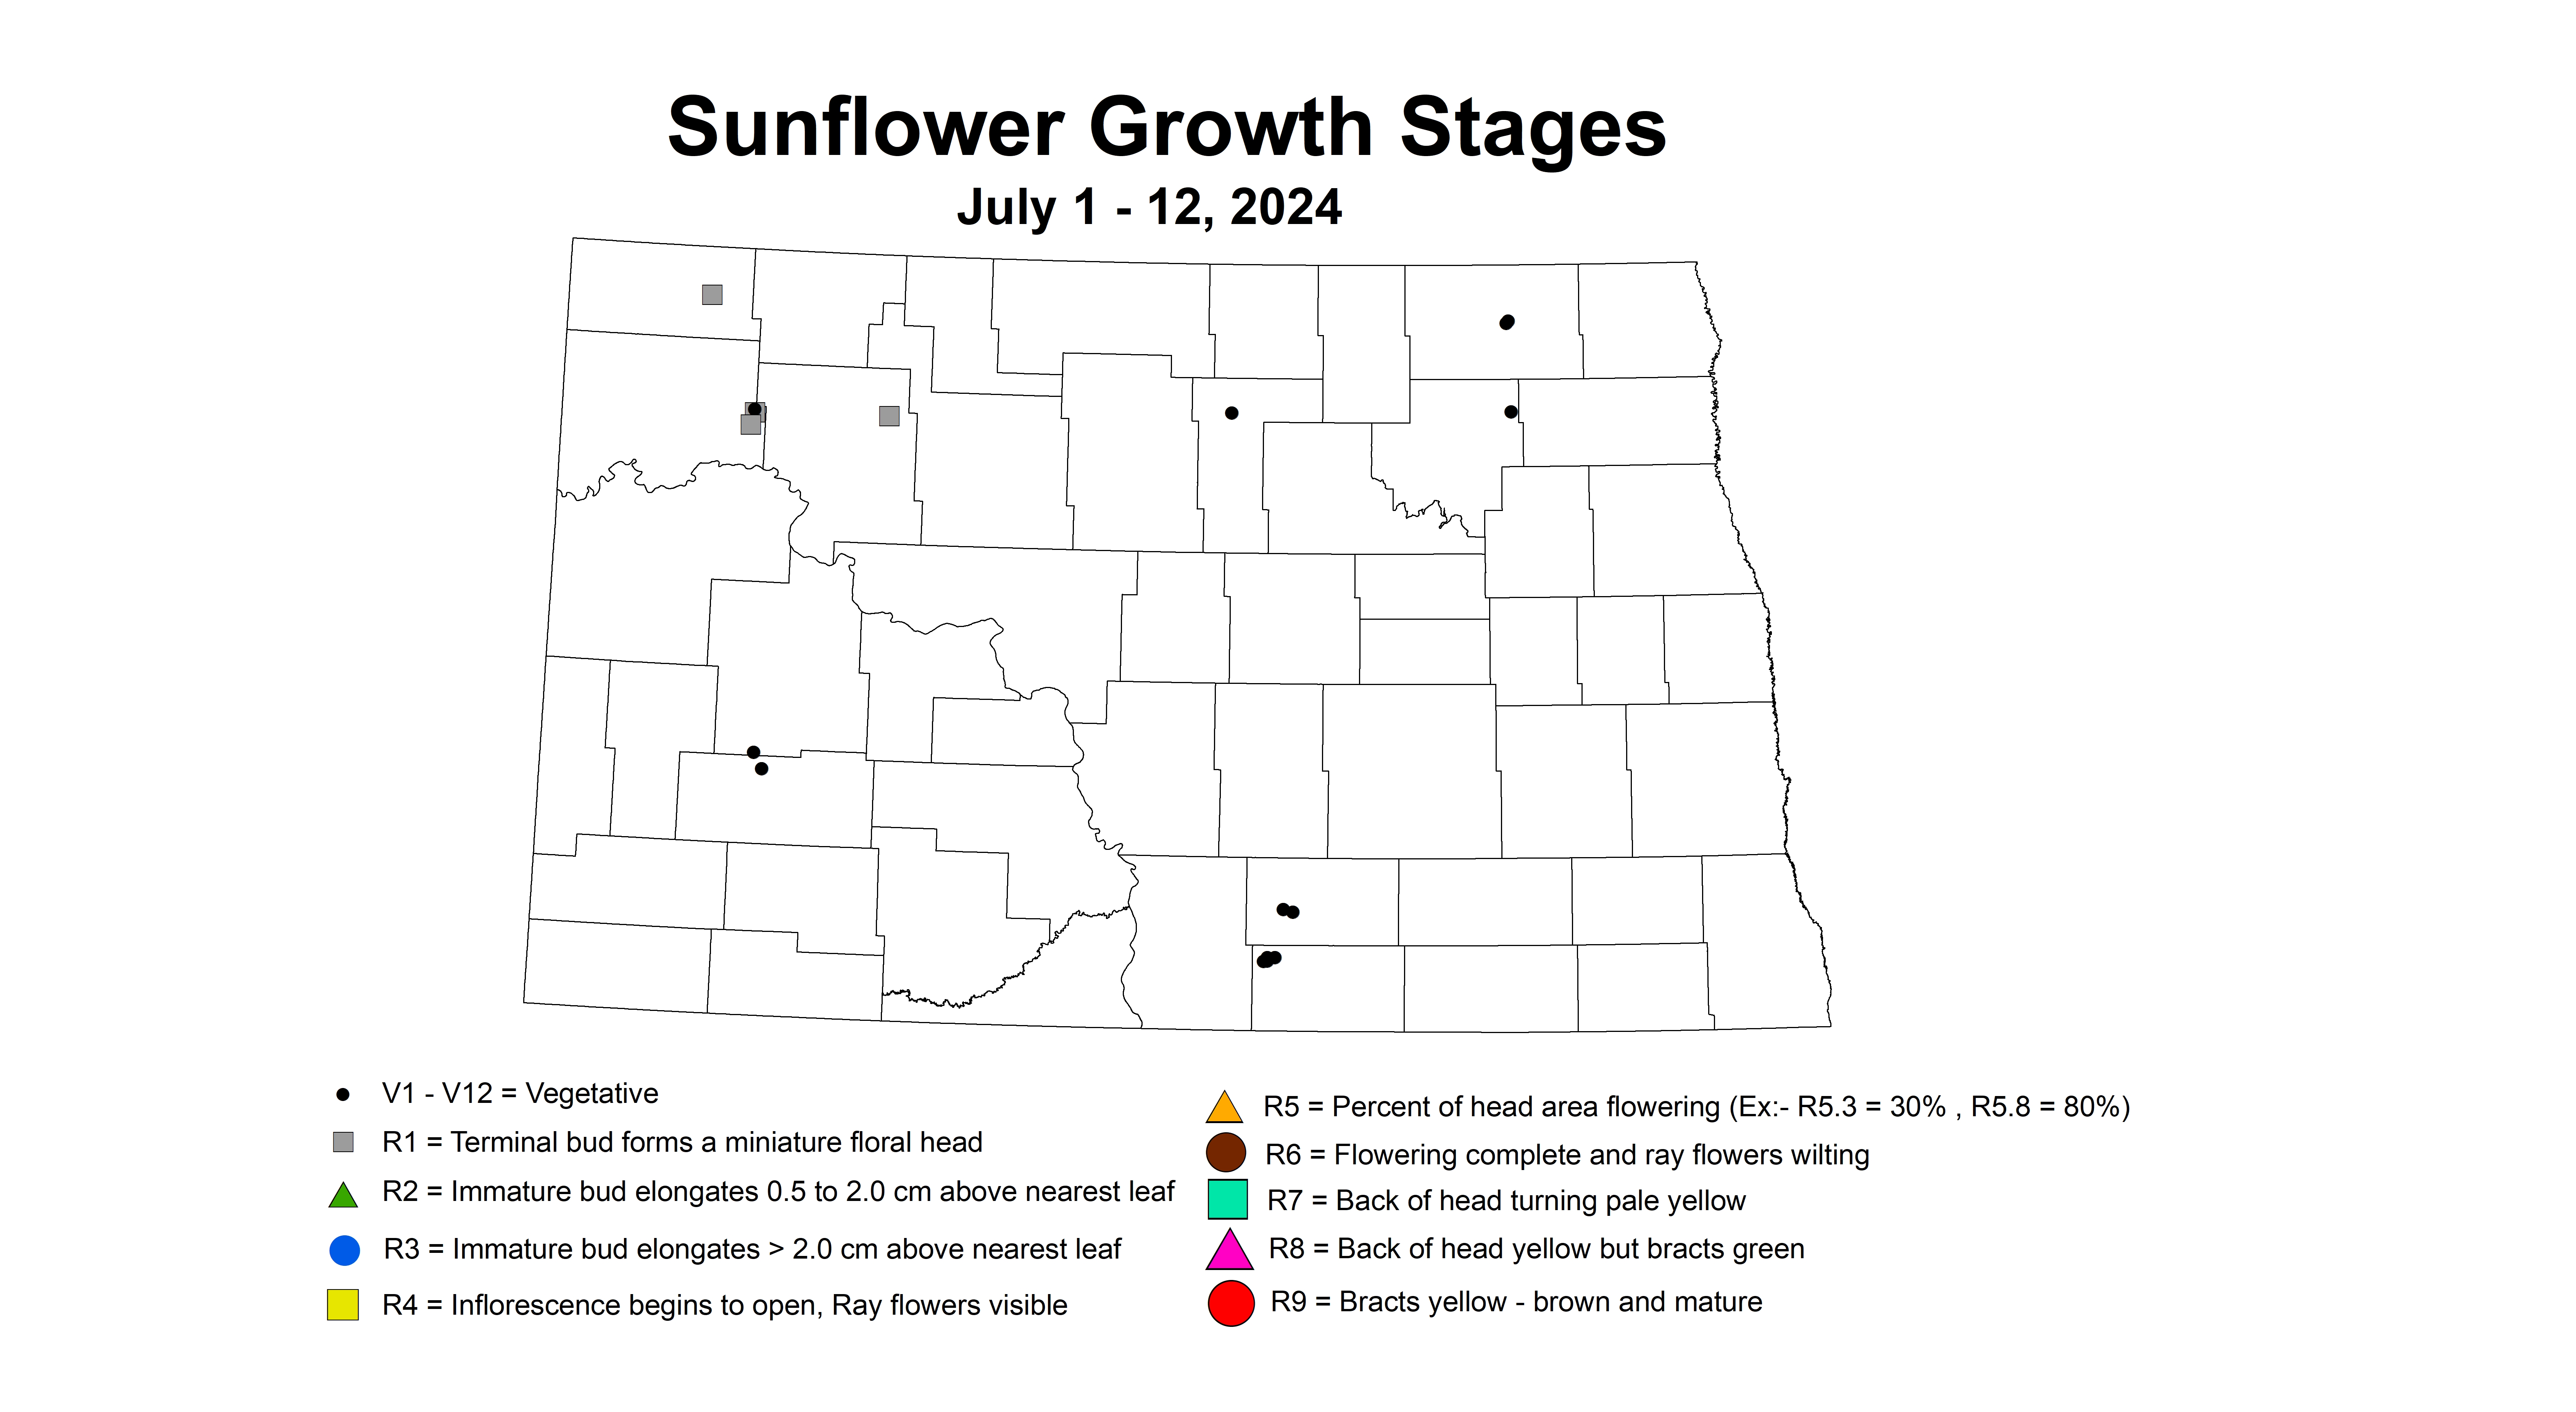 sunflower growth stages July 1 - 12 2024